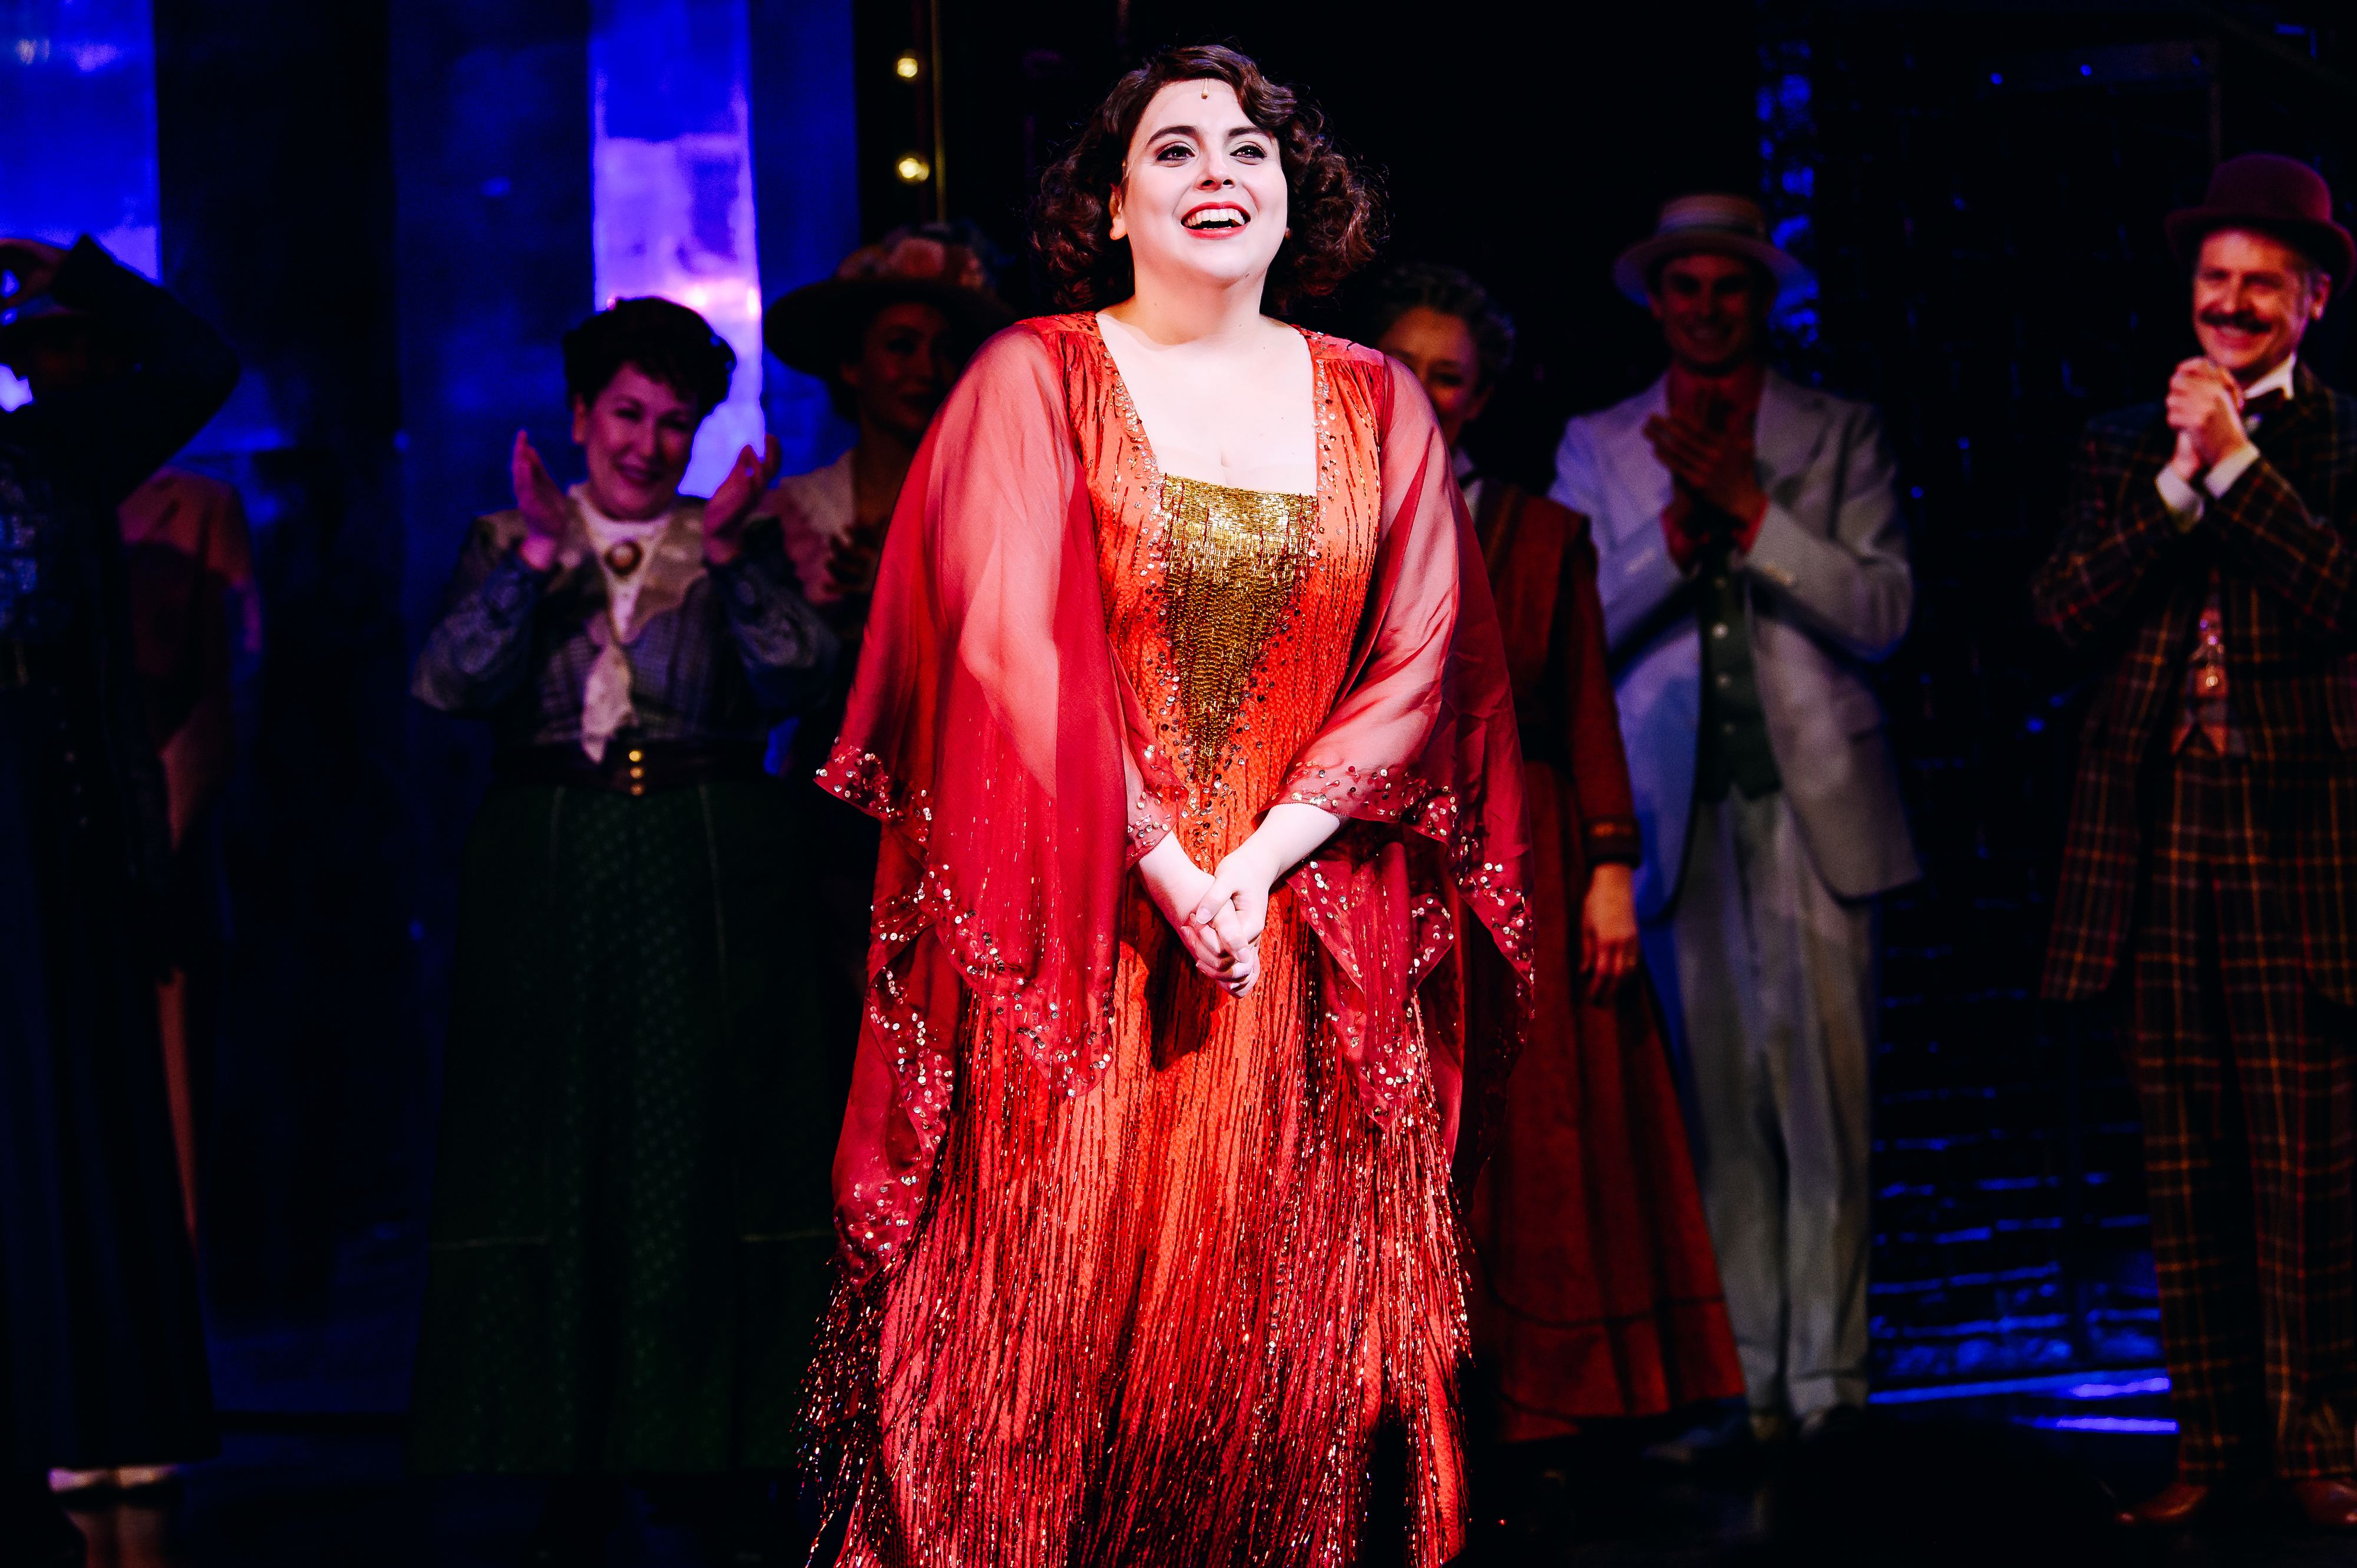 Woman in stage costume with sequins and a sheer red shawl, smiling on theater stage with cast in background